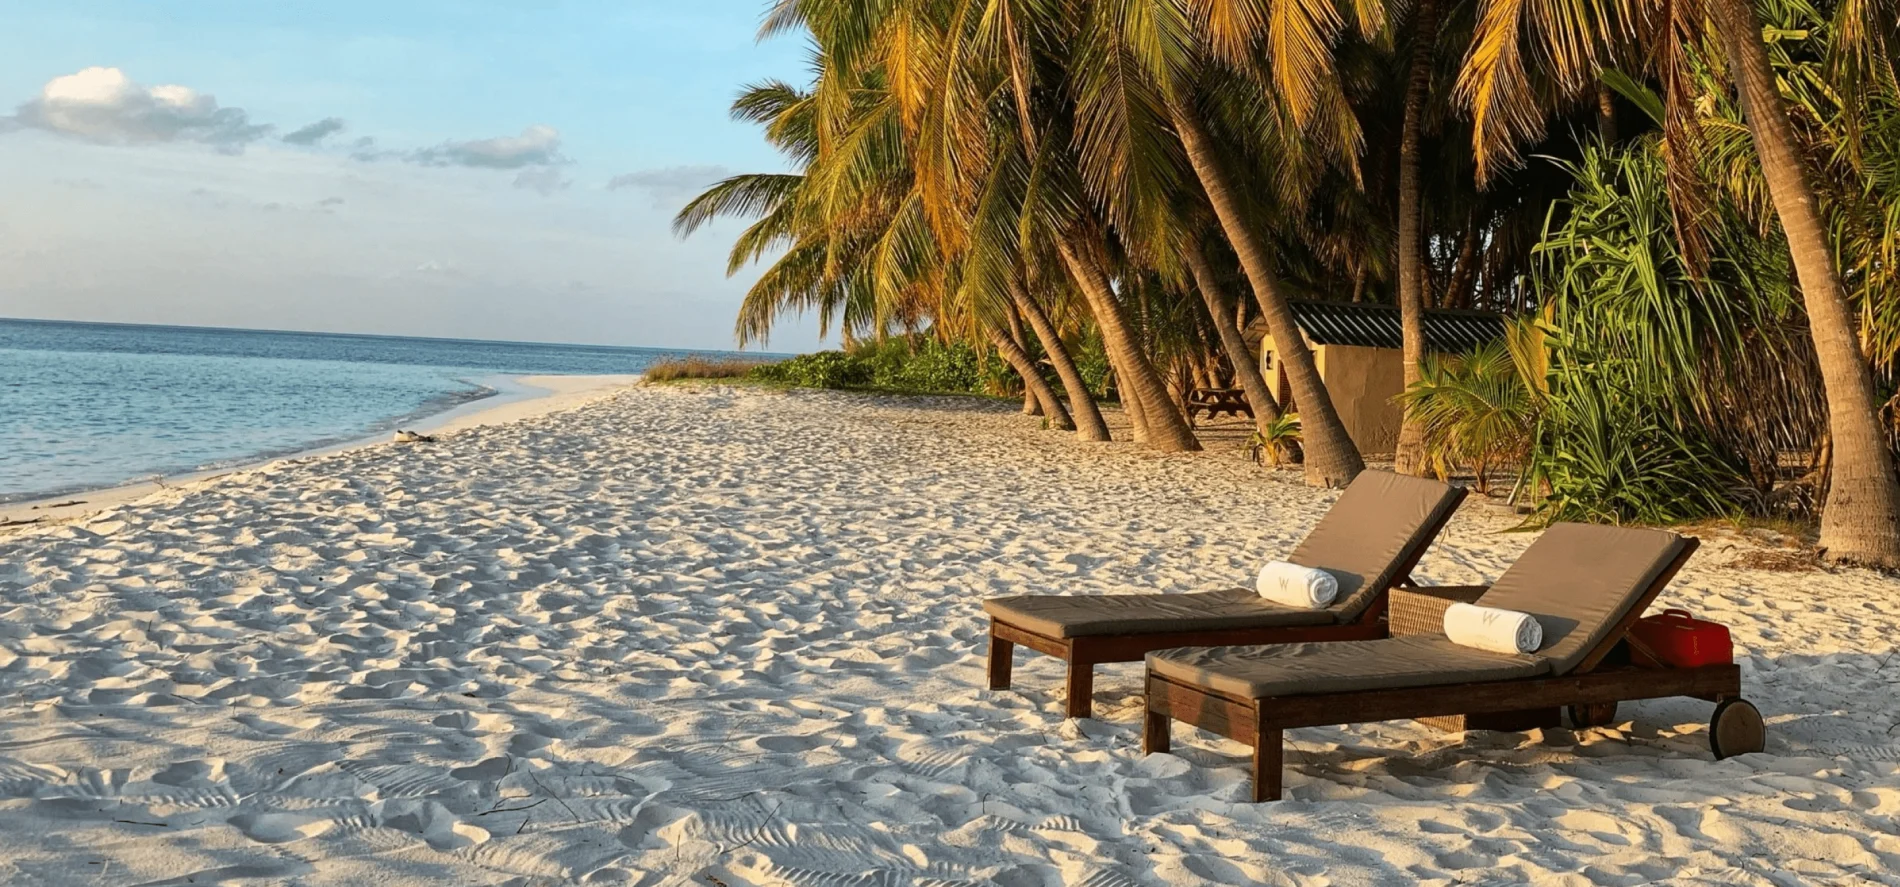 Image of lounge chairs on a tropical beach near sunset